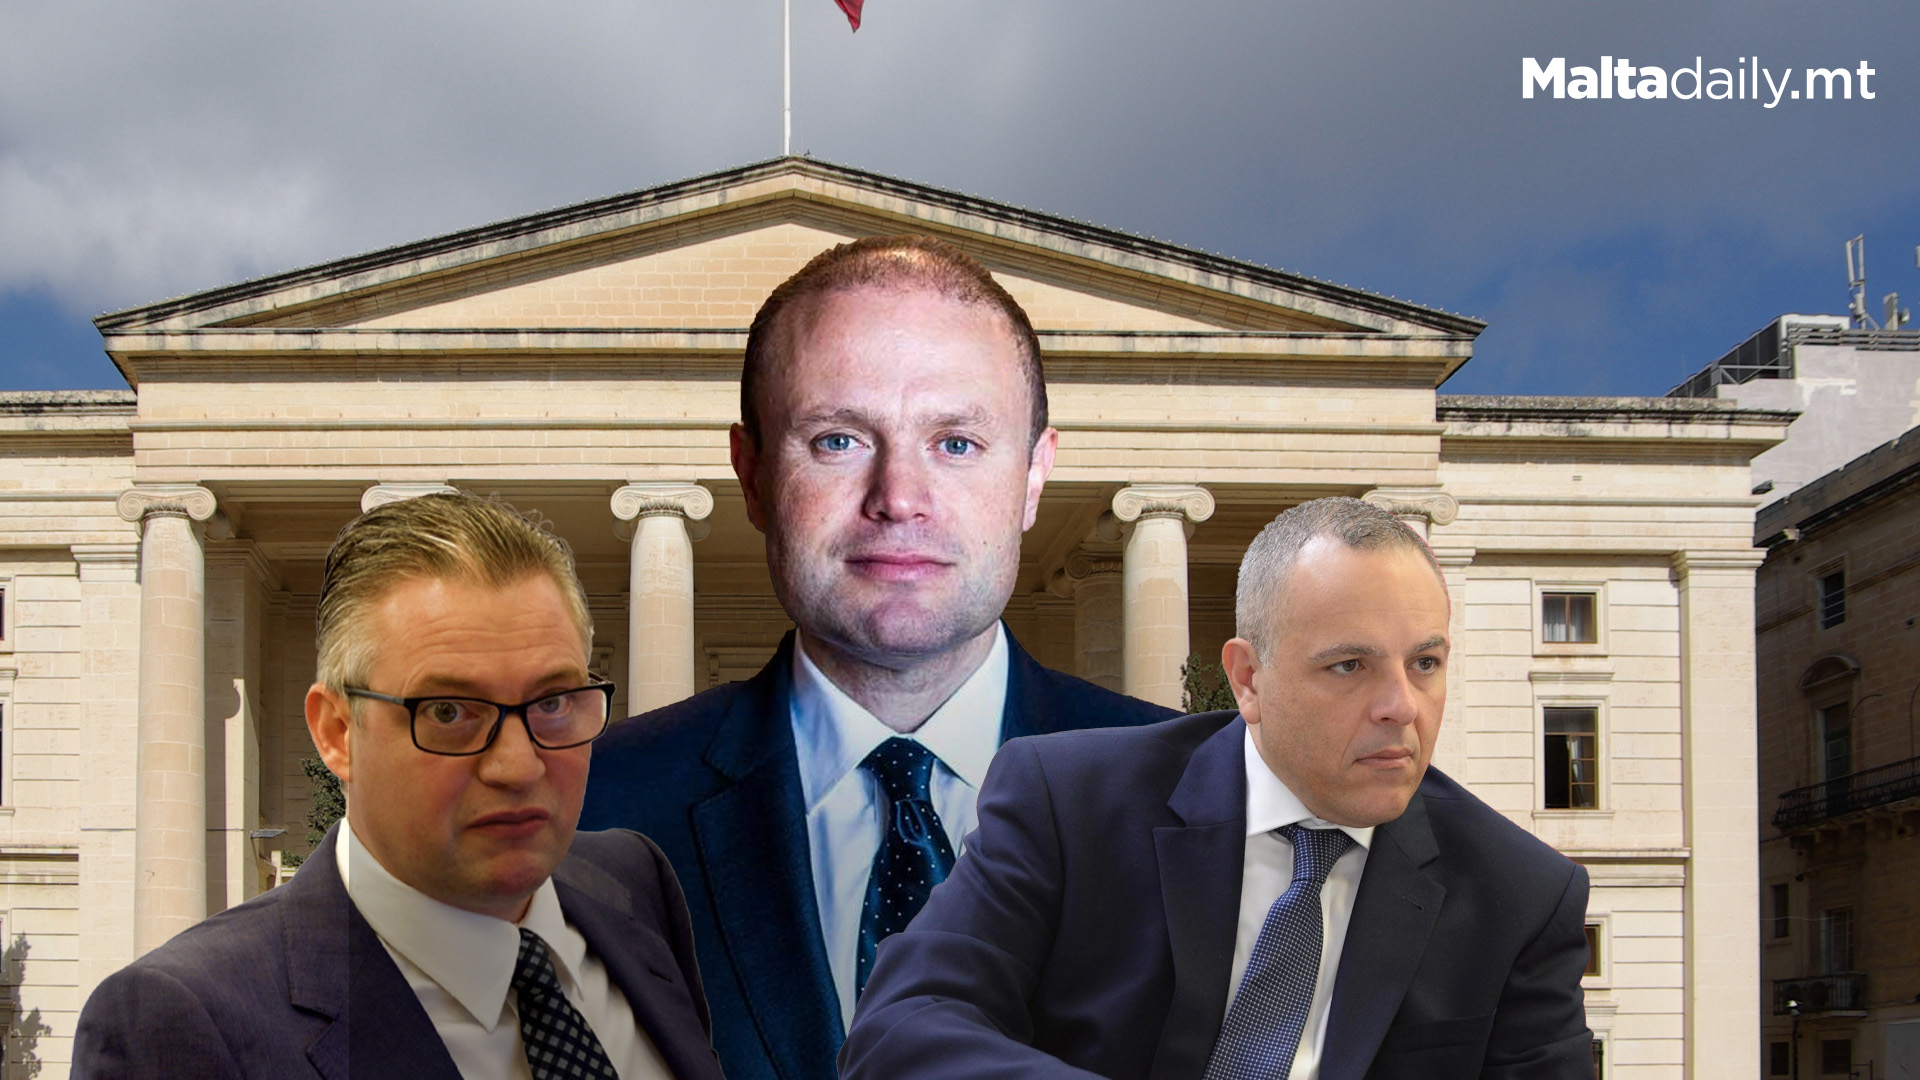 Criminal Charges Against Muscat, Mizzi & Schembri Reportedly Presented